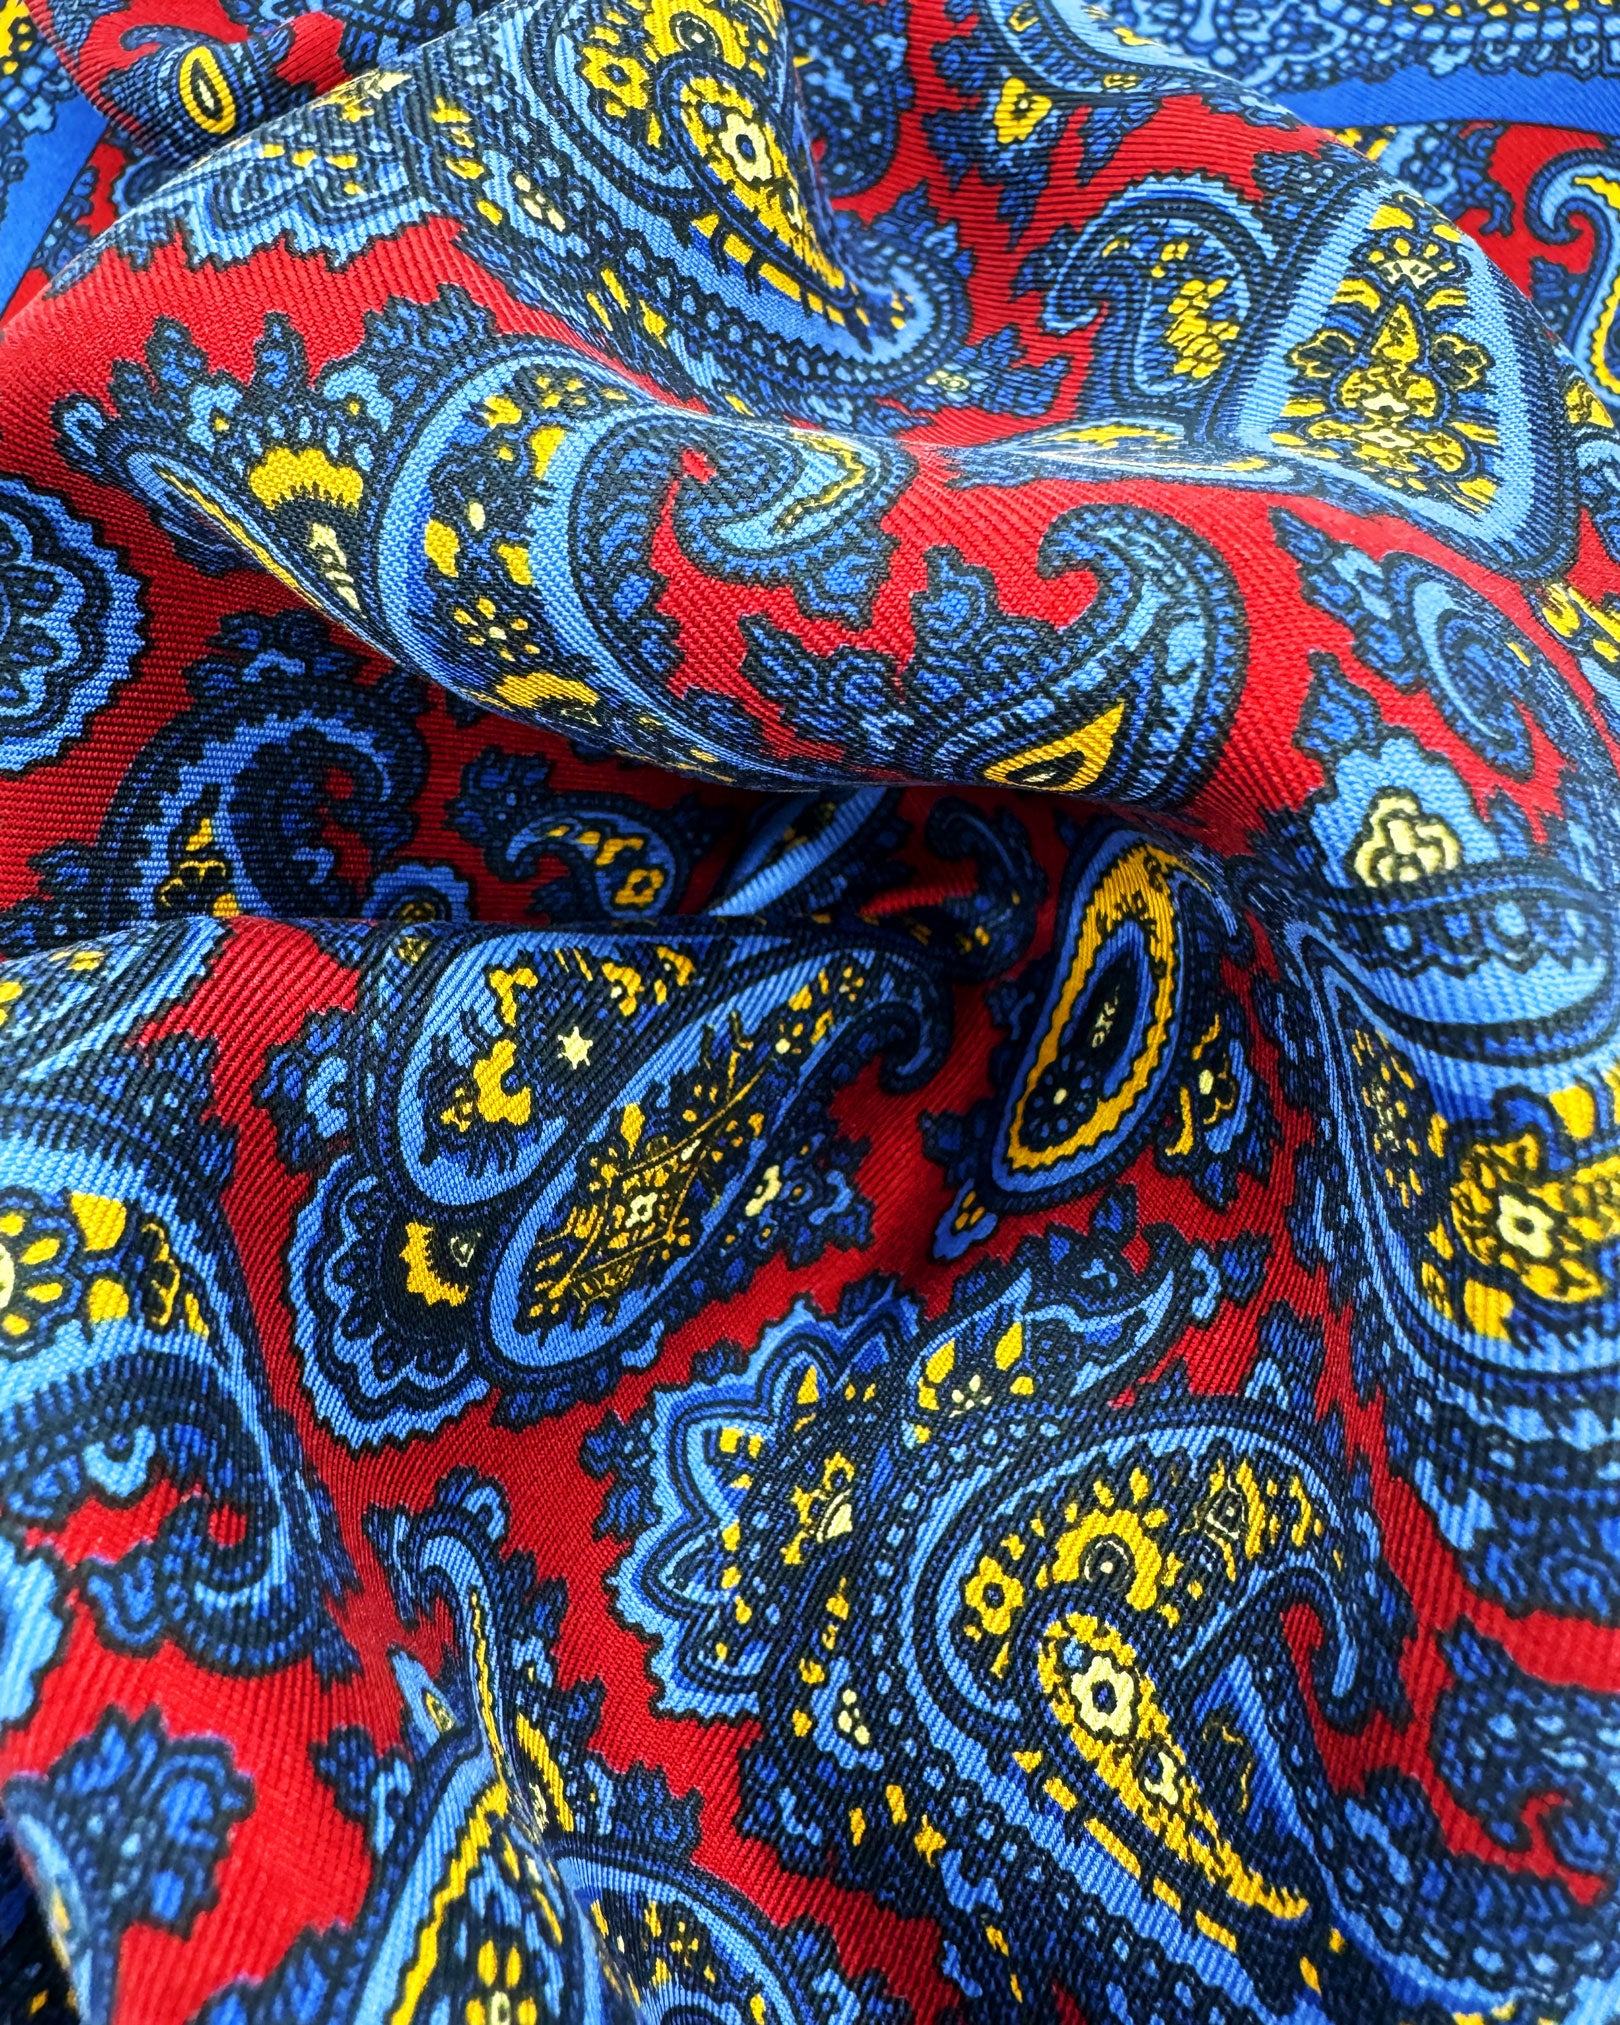 A ruffled close-up of the 'Avebury' pocket square, presenting a closer view of the yellow and blue paisley patterns against the attractive lustre of the madder silk material. 